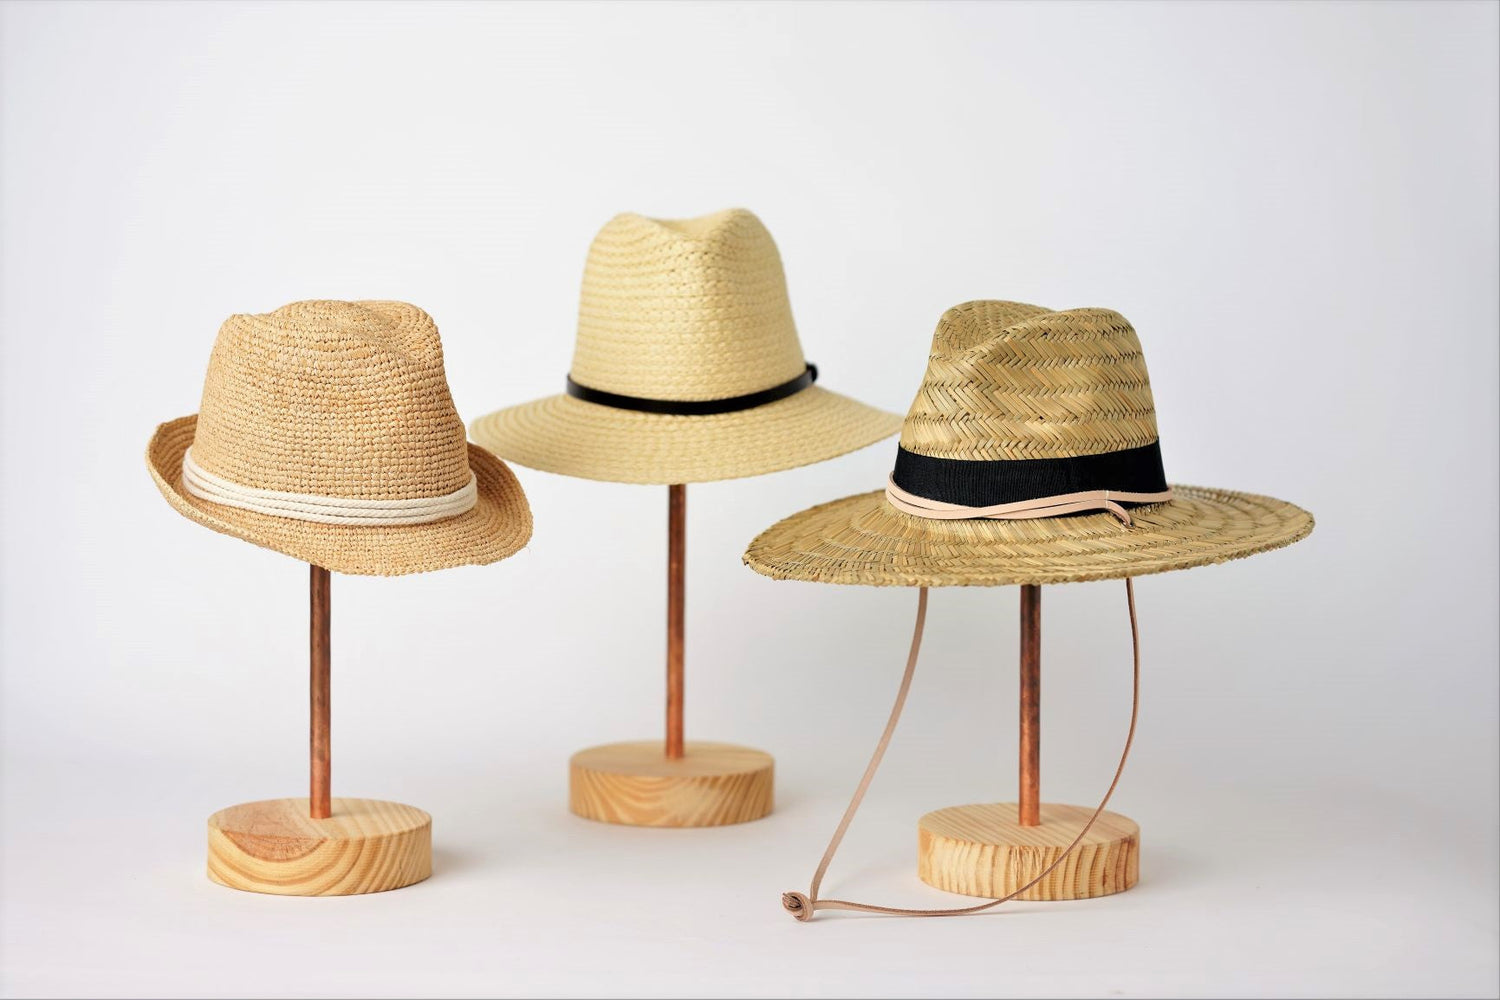 Collection of three straw hats